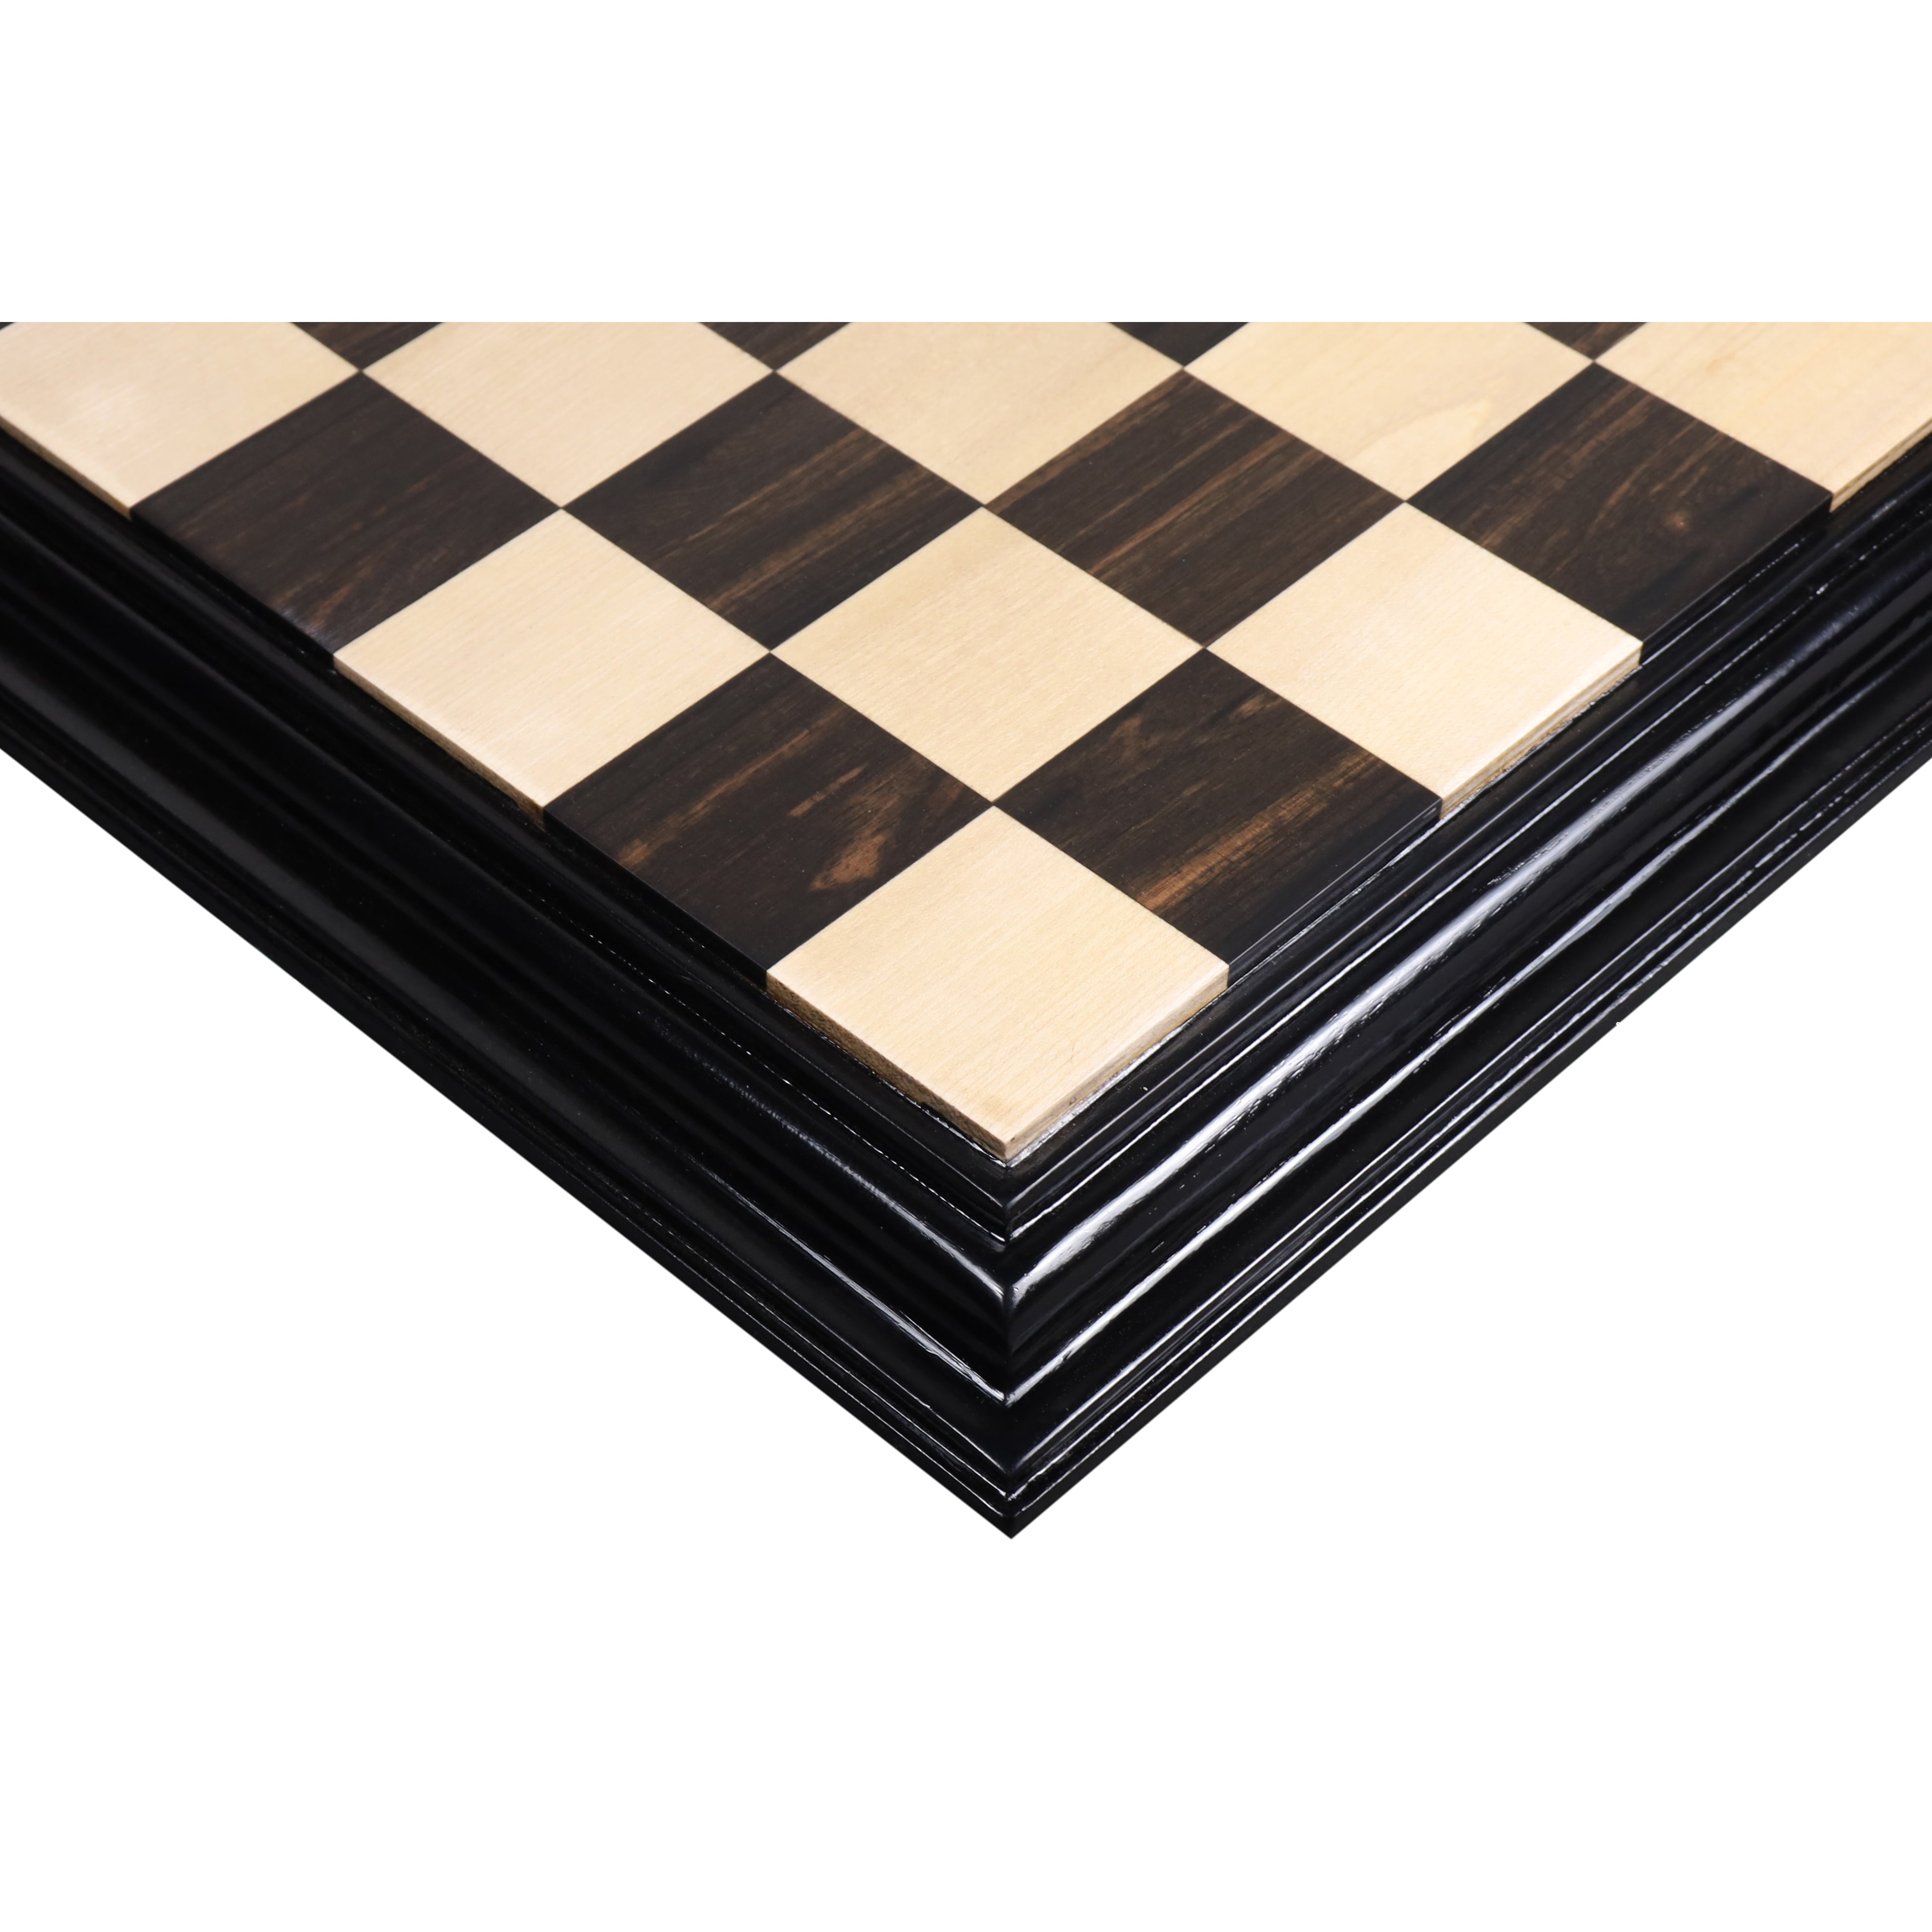 Ebony & Maple Wood Luxury Chess board with Carved Border - Unique Chess Set online buy